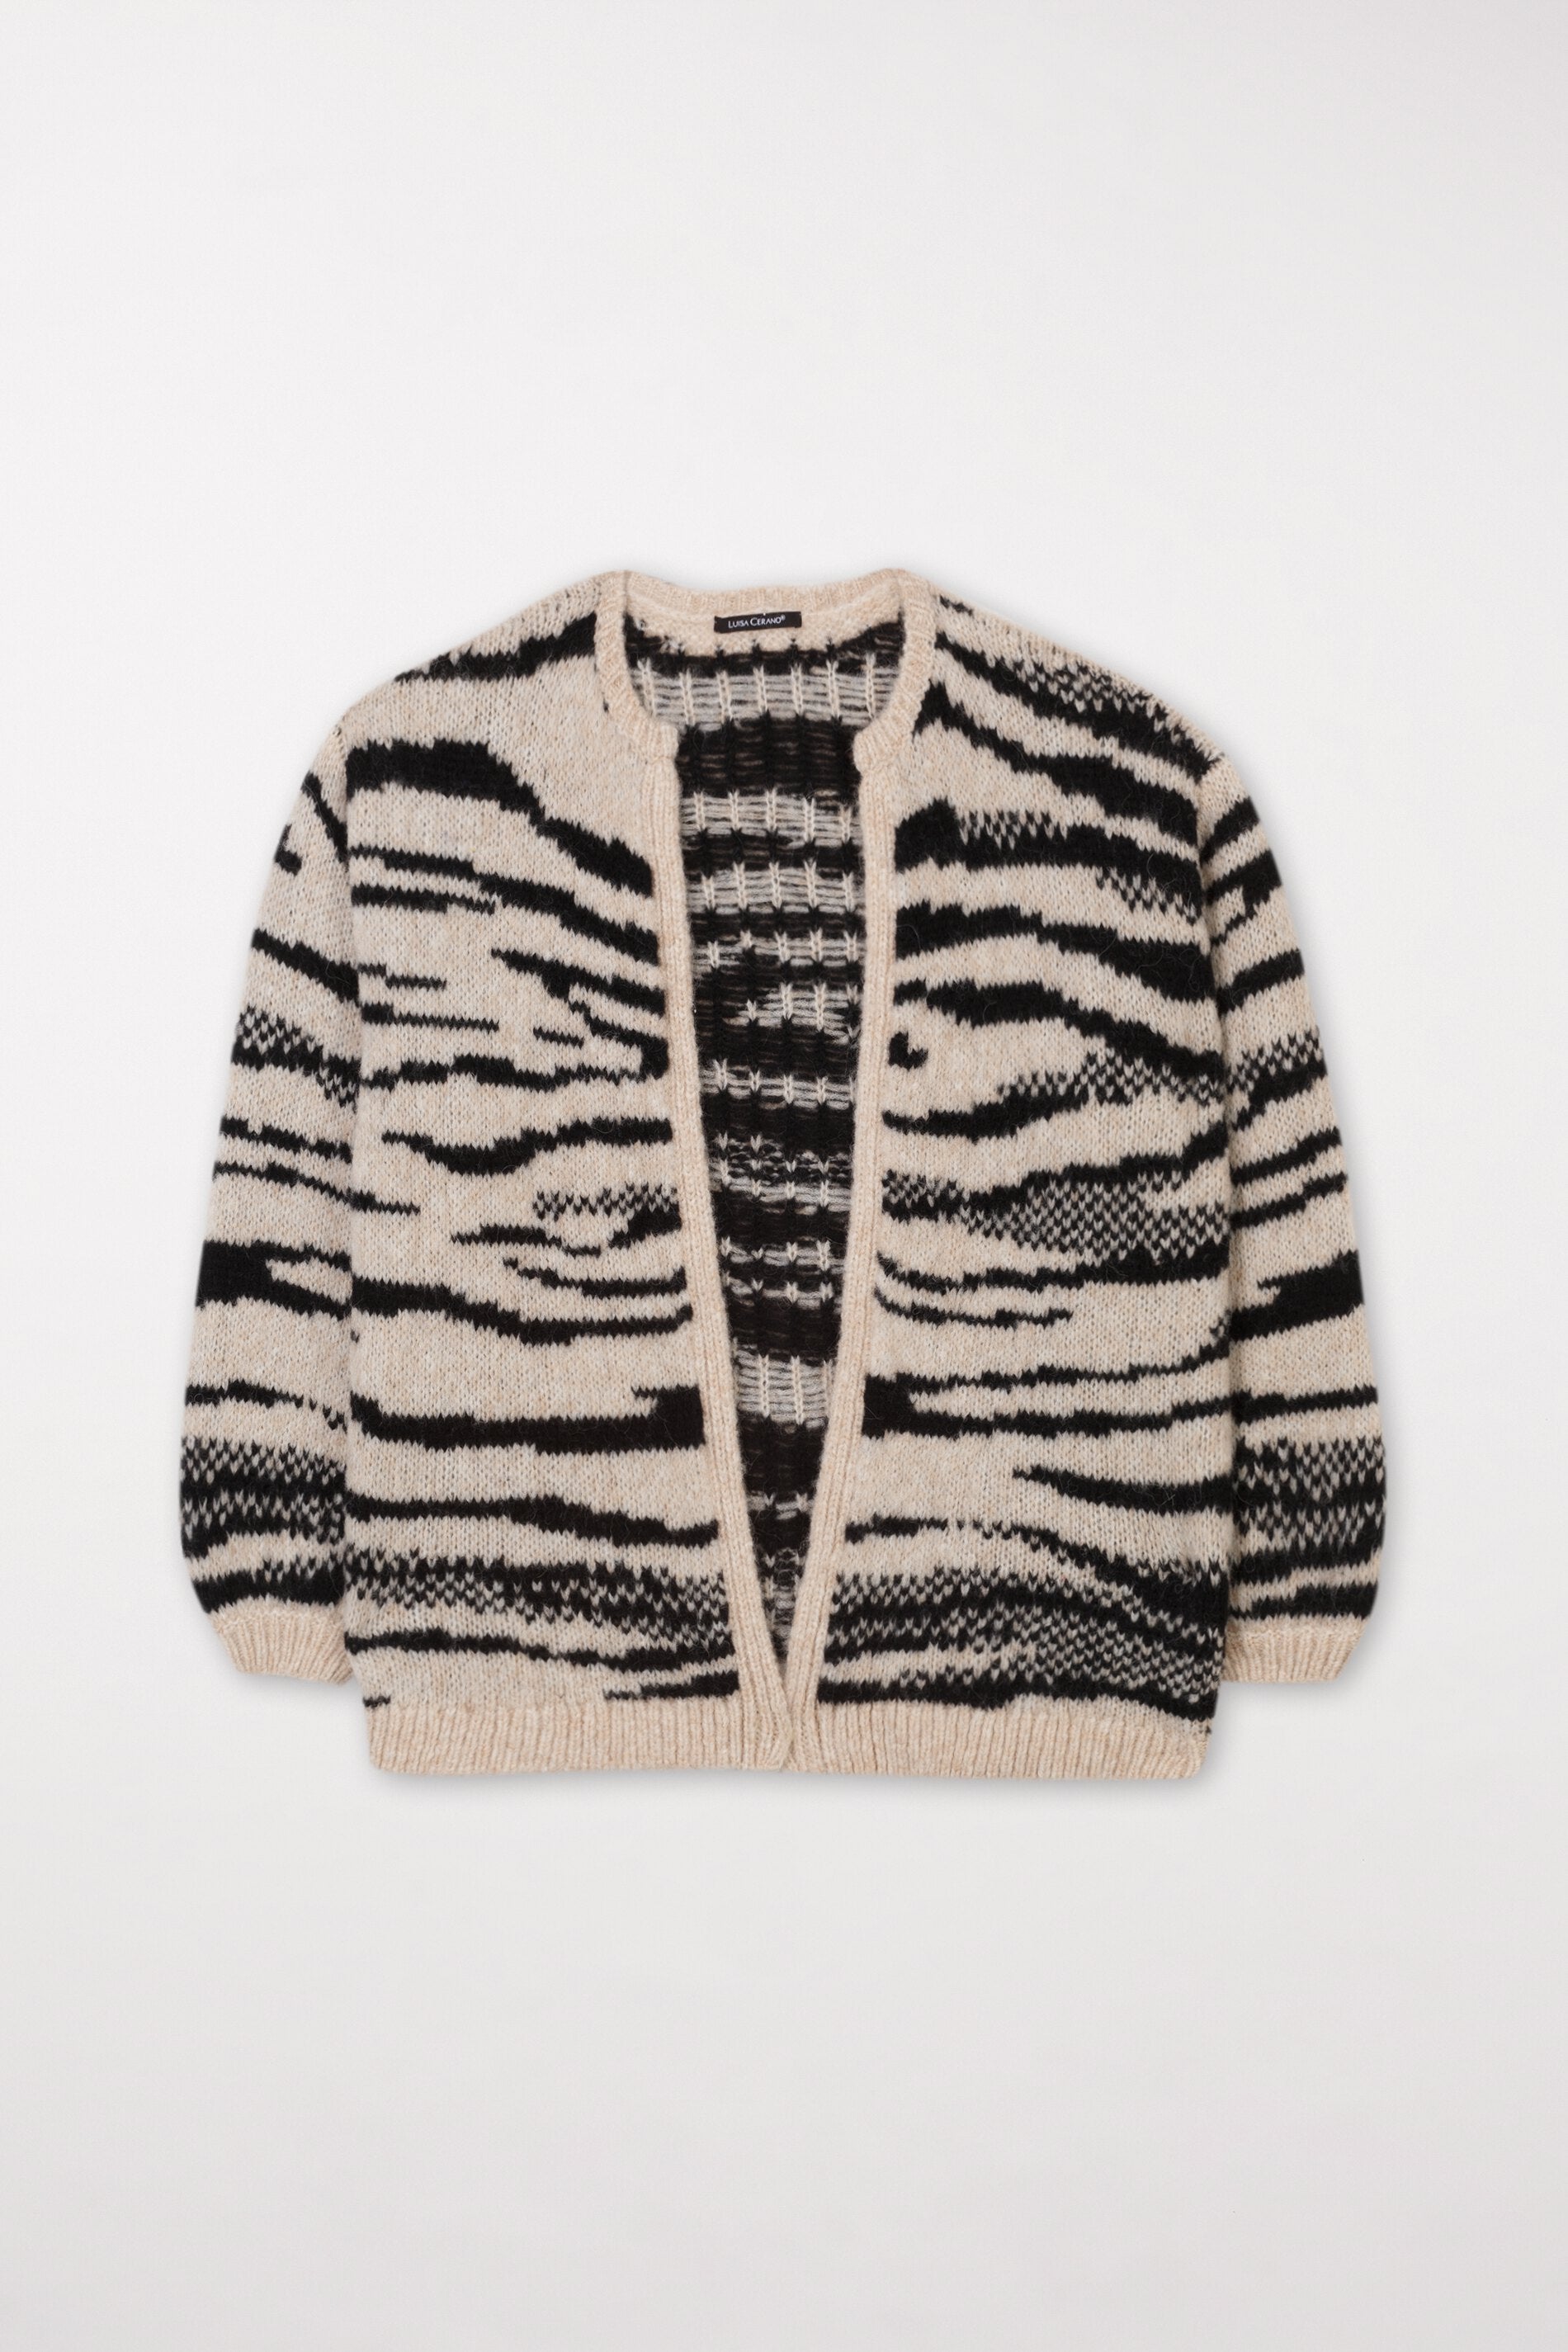 LUISA CERANO-OUTLET-SALE-Cardigan in Animal-Jacquard-Strick-34-eggshell / black-by-ARCHIVIST